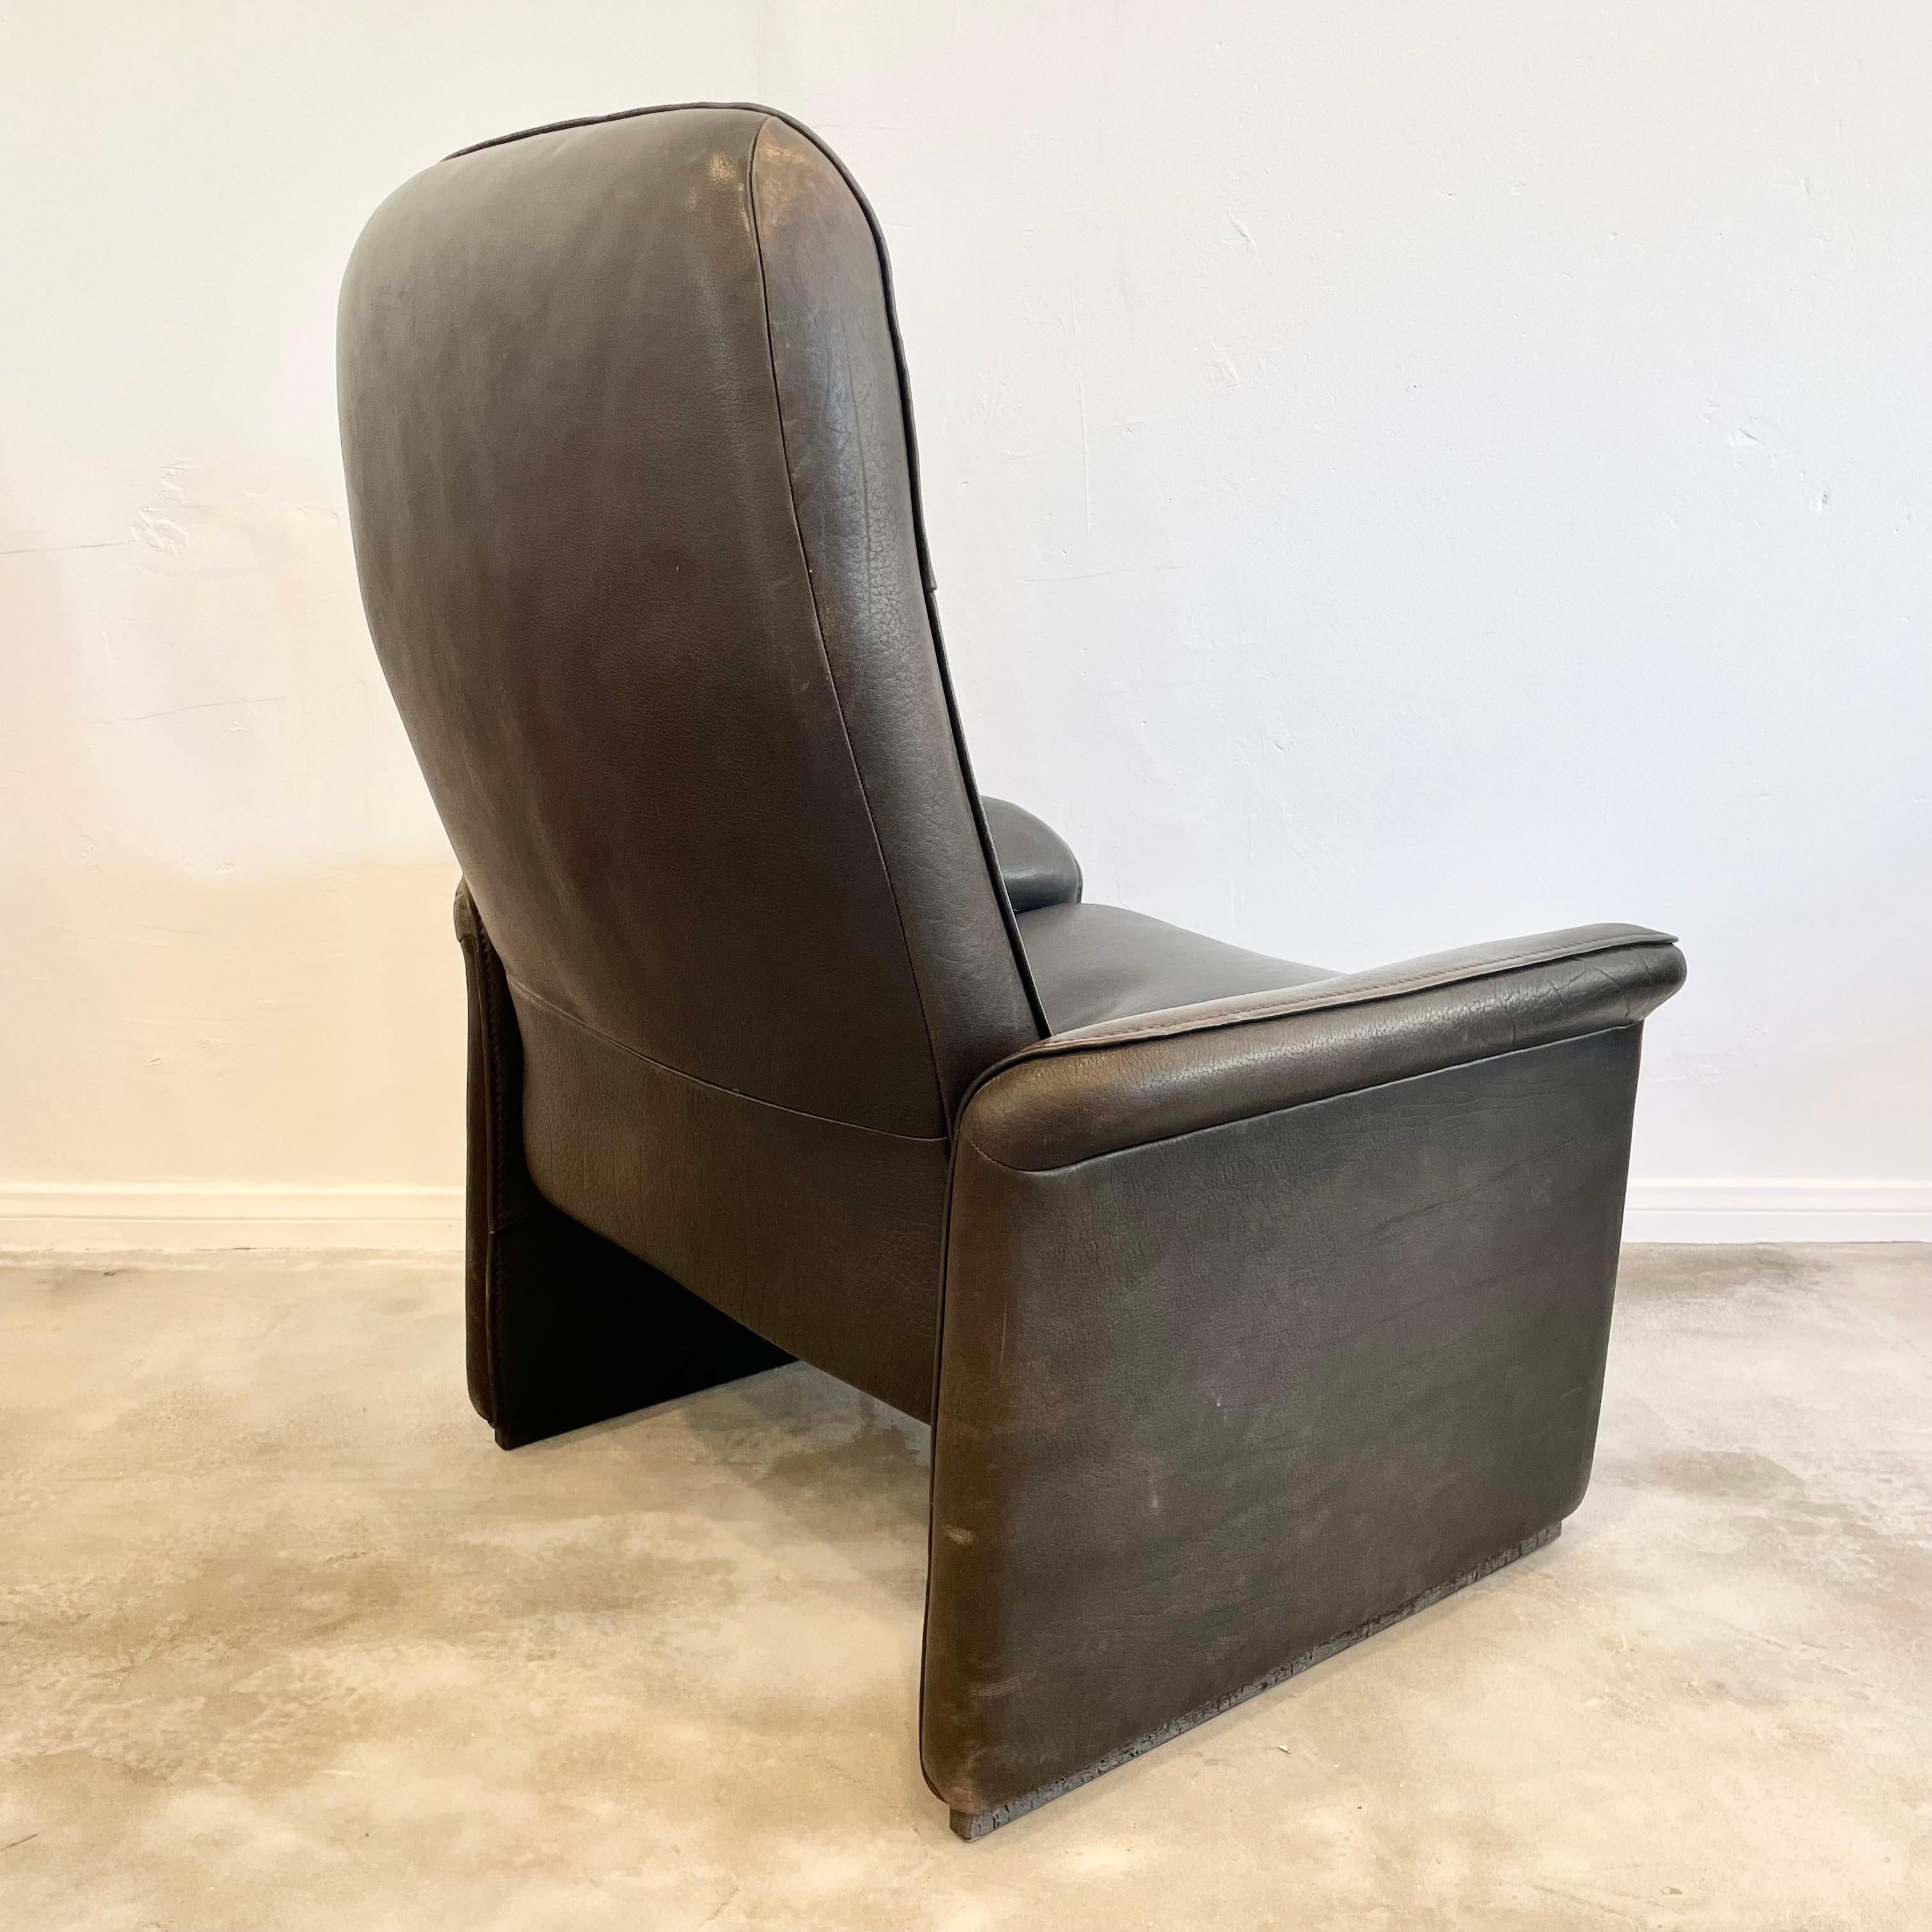 Late 20th Century De Sede DS-50 Black Leather Recliner Chair, 1970s Switzerland For Sale